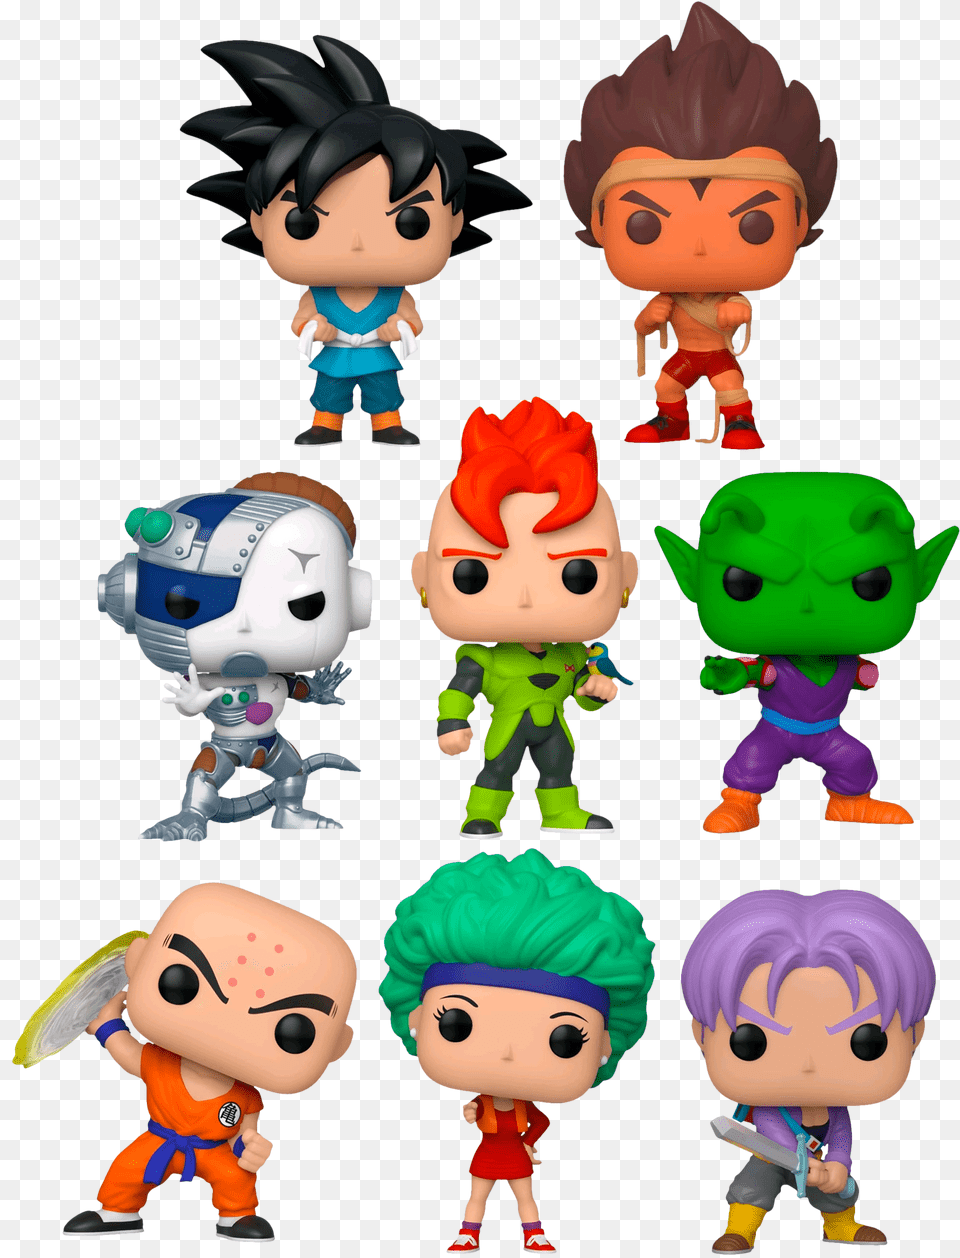 Android 16 Funko Pop, Toy, Doll, Baby, Person Png